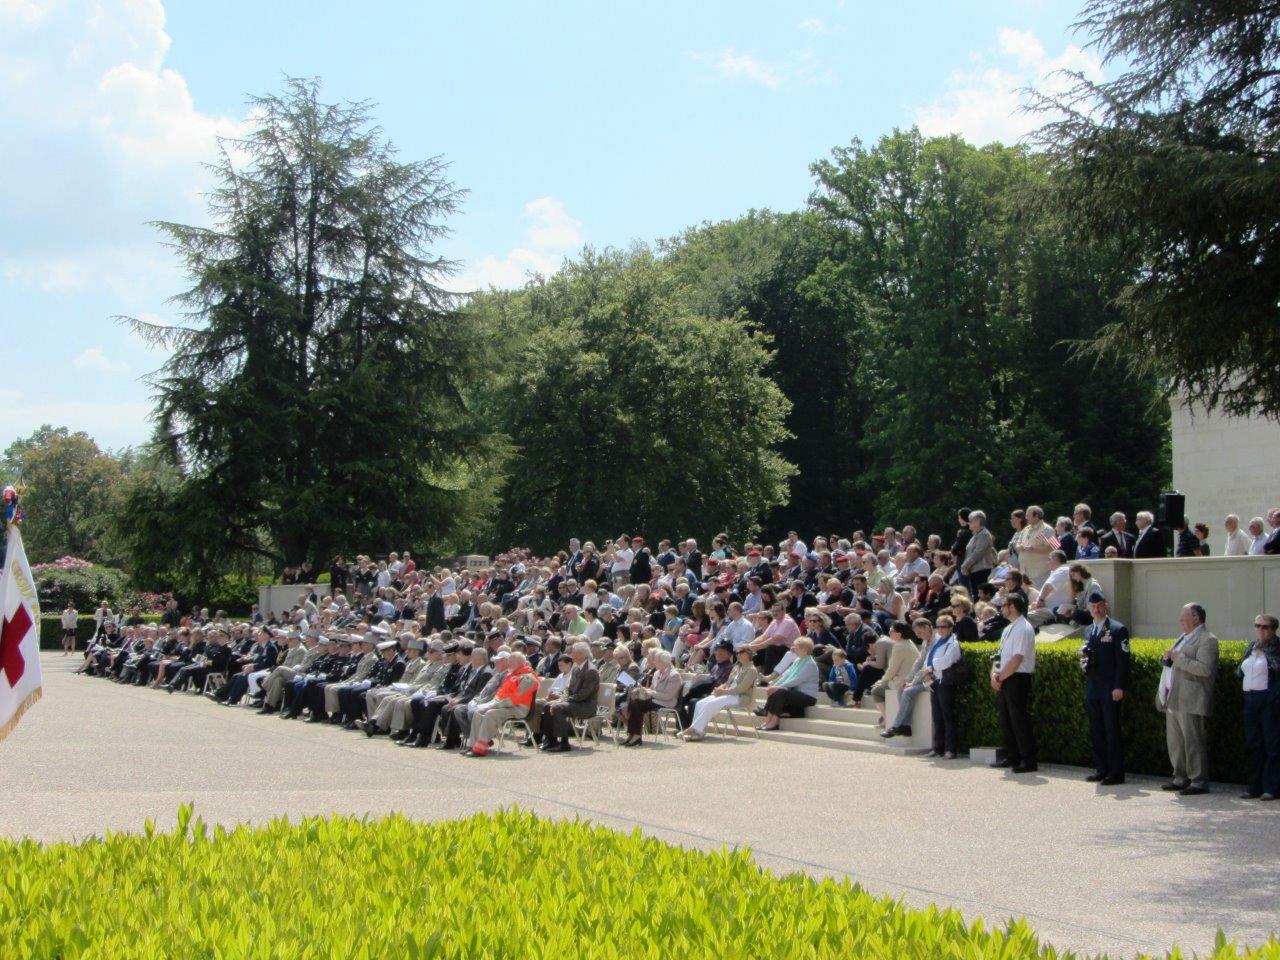 Attendees sit during the ceremony.